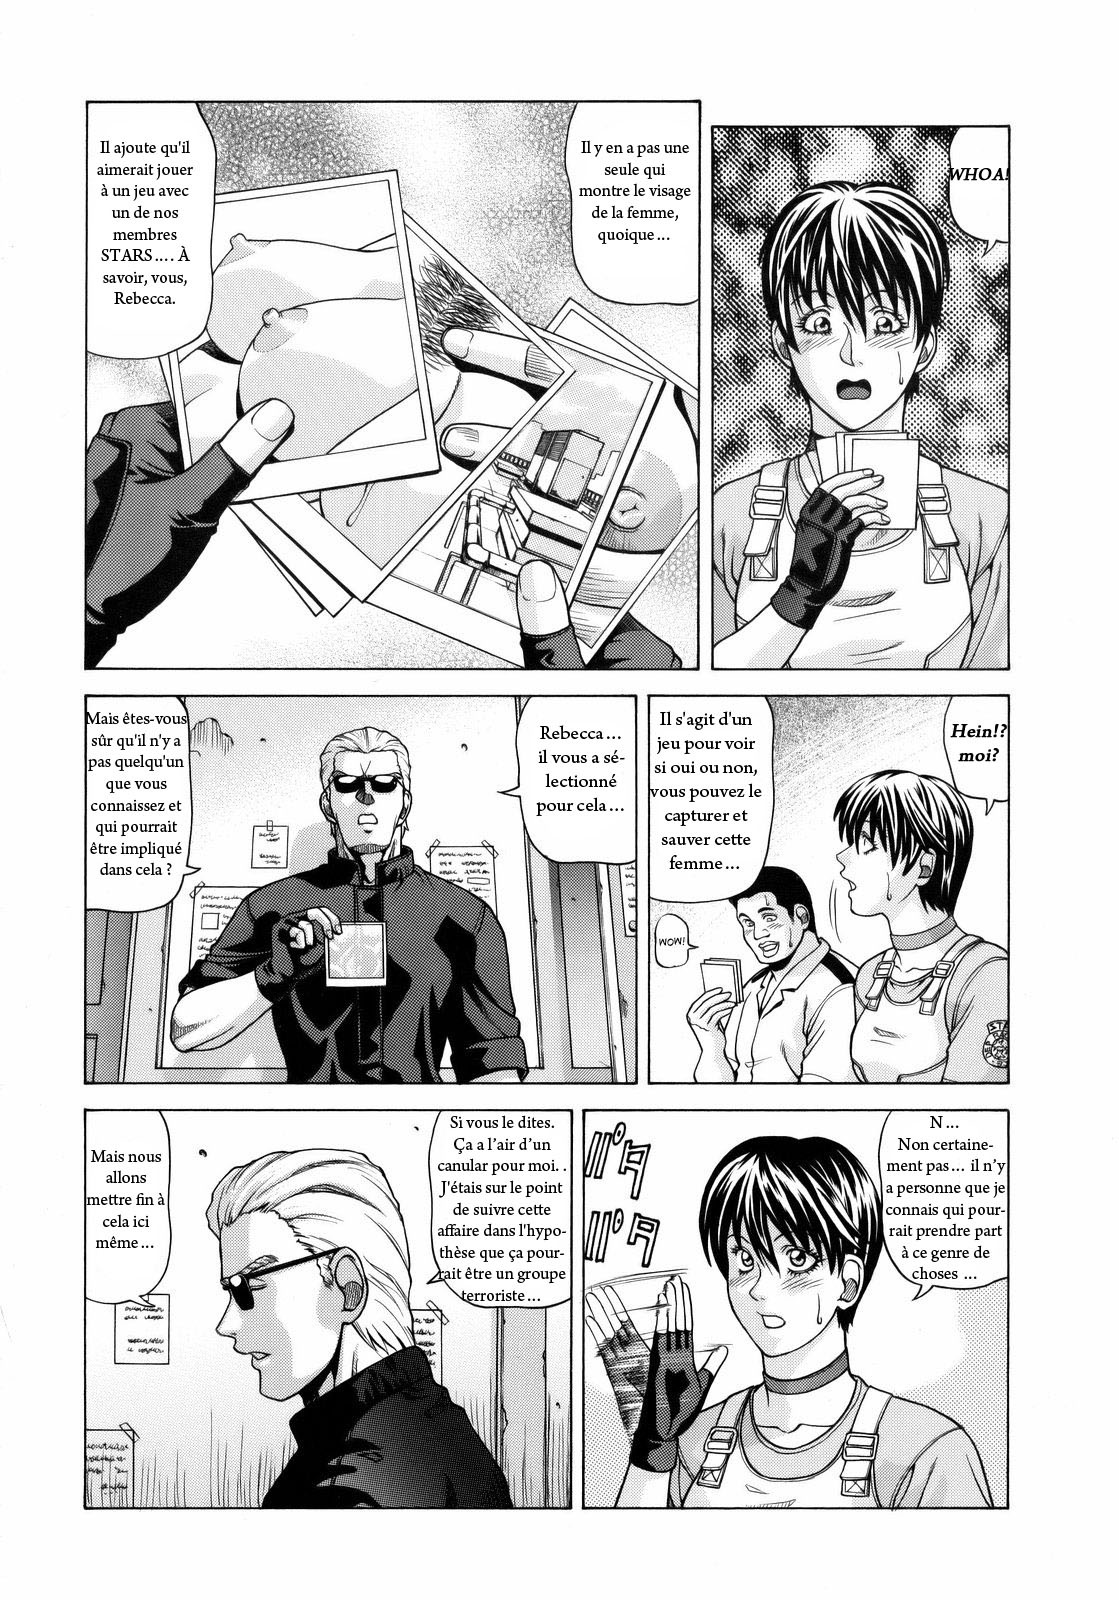 (C75) [Human High-Light Film (Jacky Knee-san)] Rebecca Chambers (Resident Evil) [French] page 3 full